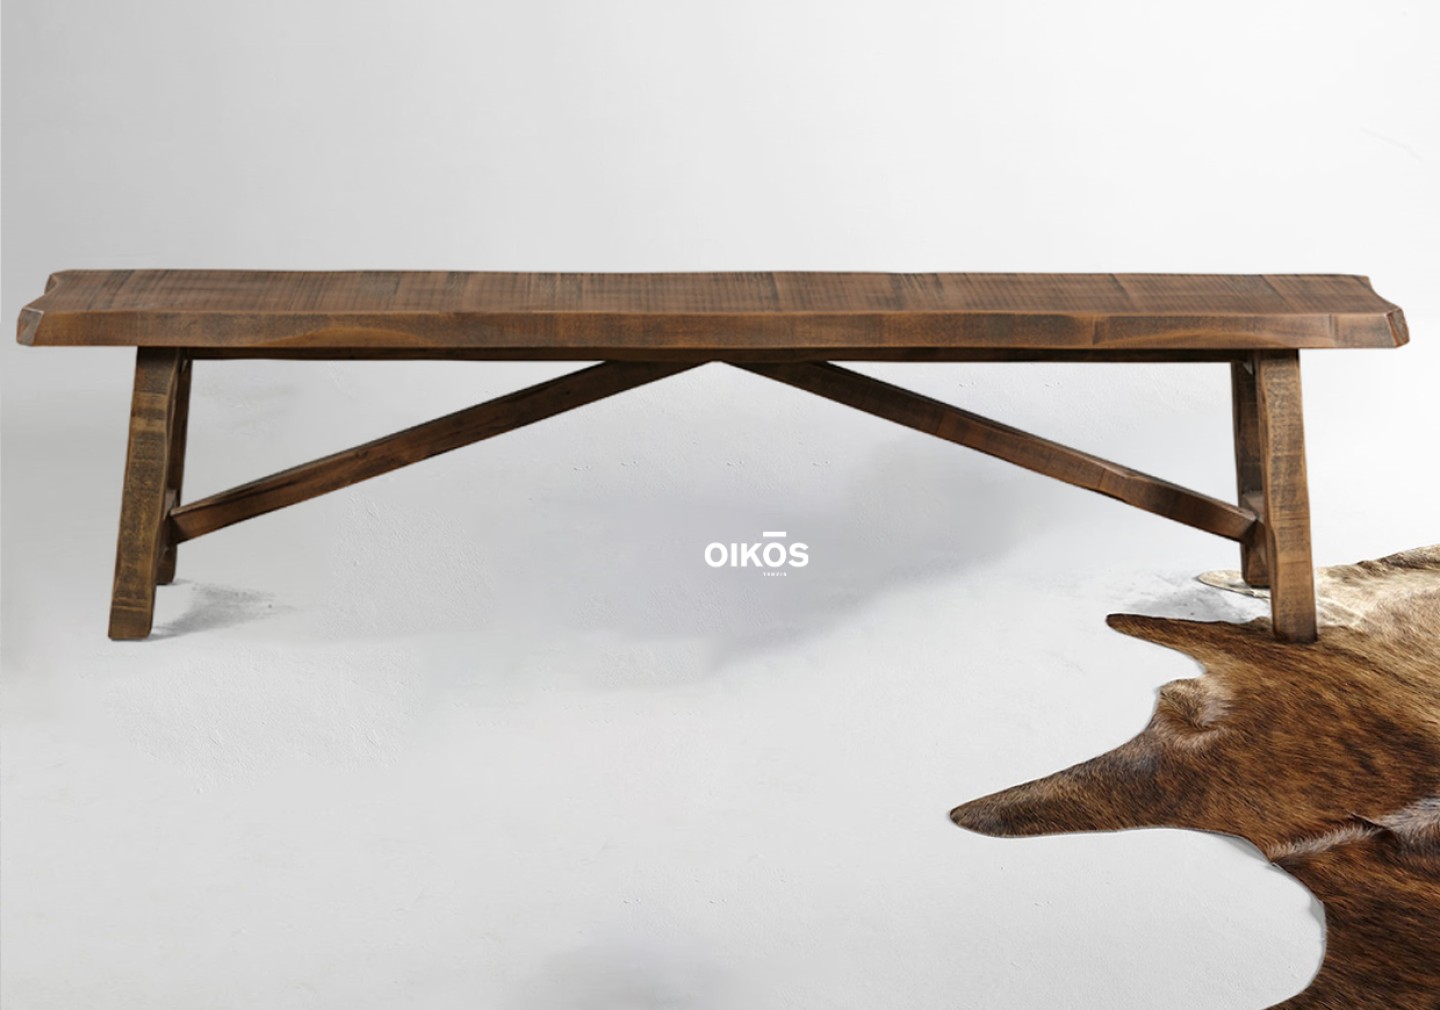 THE OWEN DINING BENCH